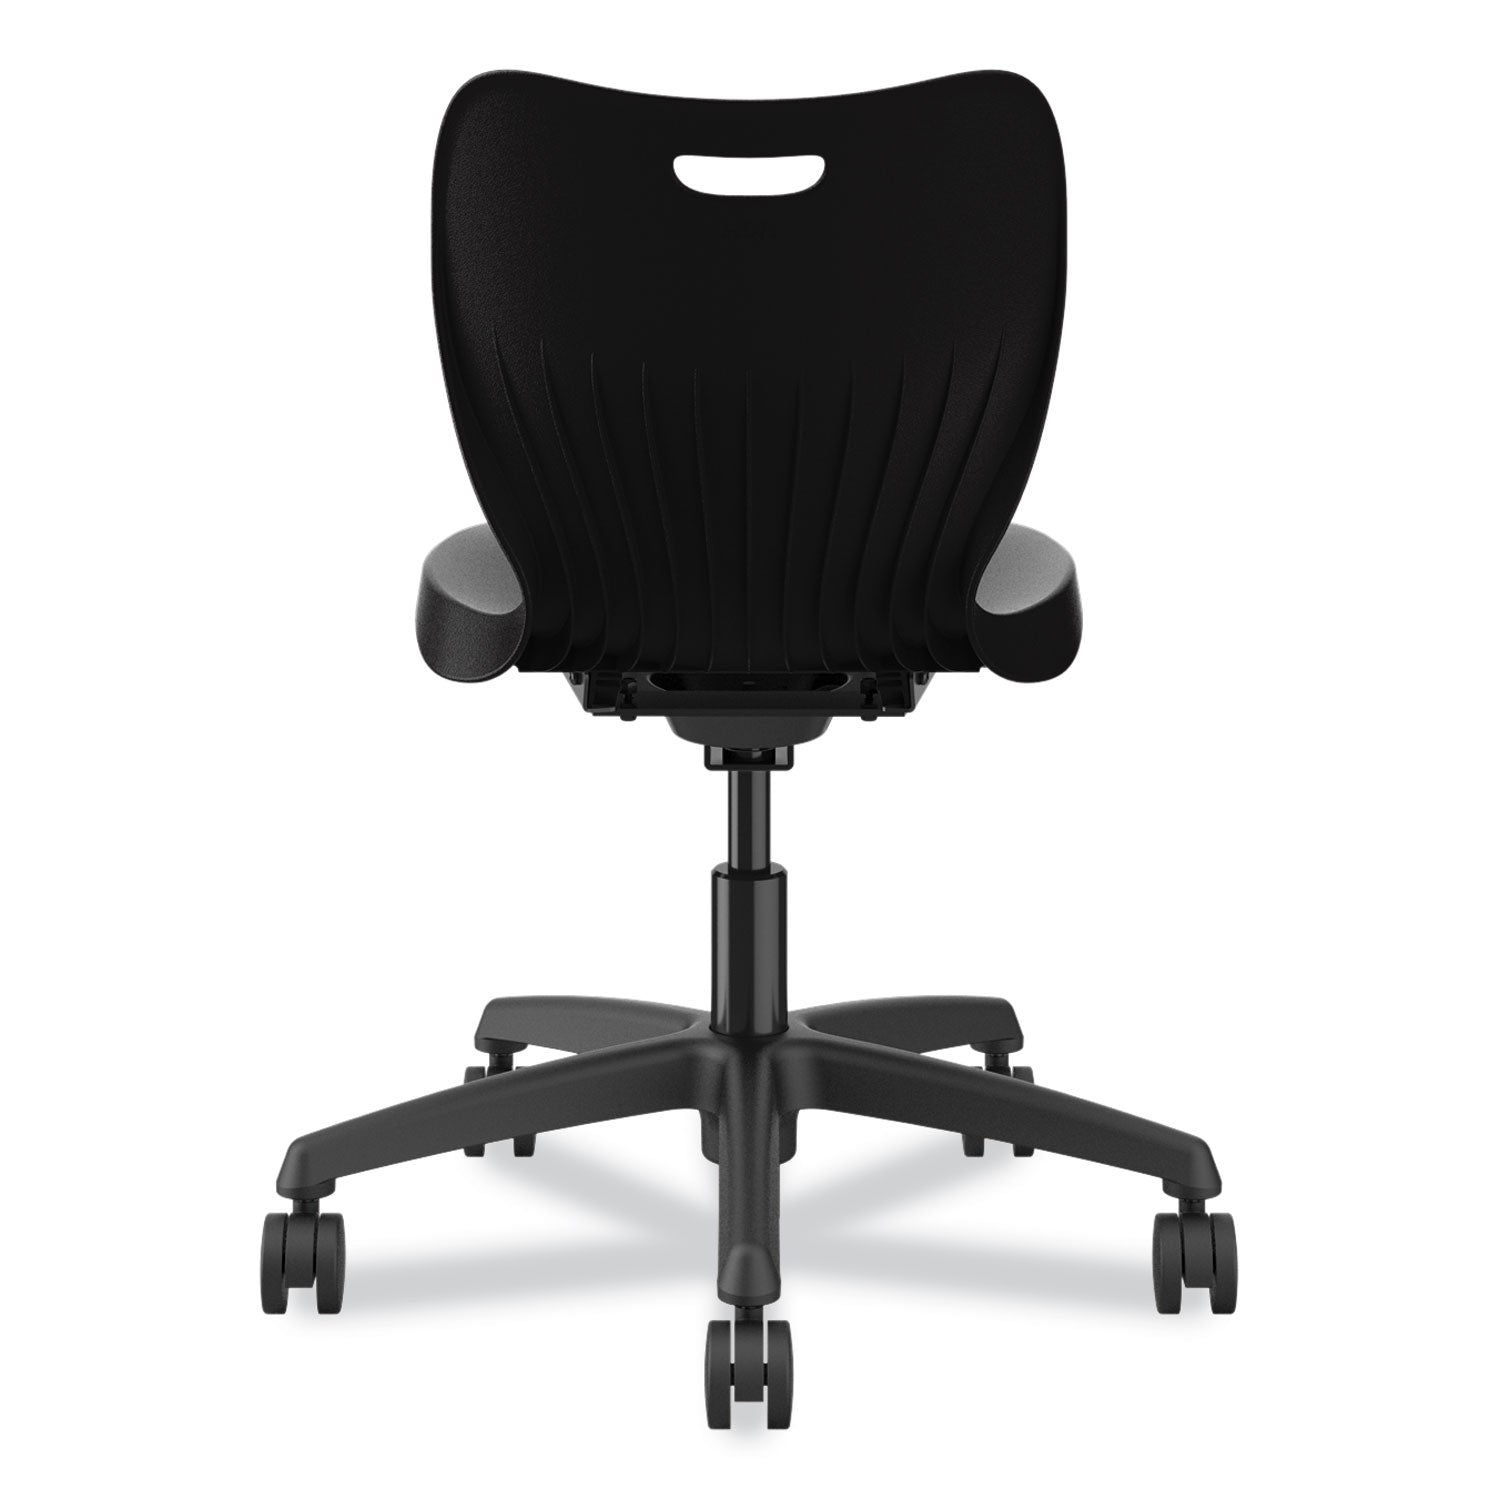 smartlink-task-chair-supports-up-to-275-lb-3475-seat-height-onyx-seat-back-black-base-ships-in-7-10-business-days_honsstk18bhlon - 3